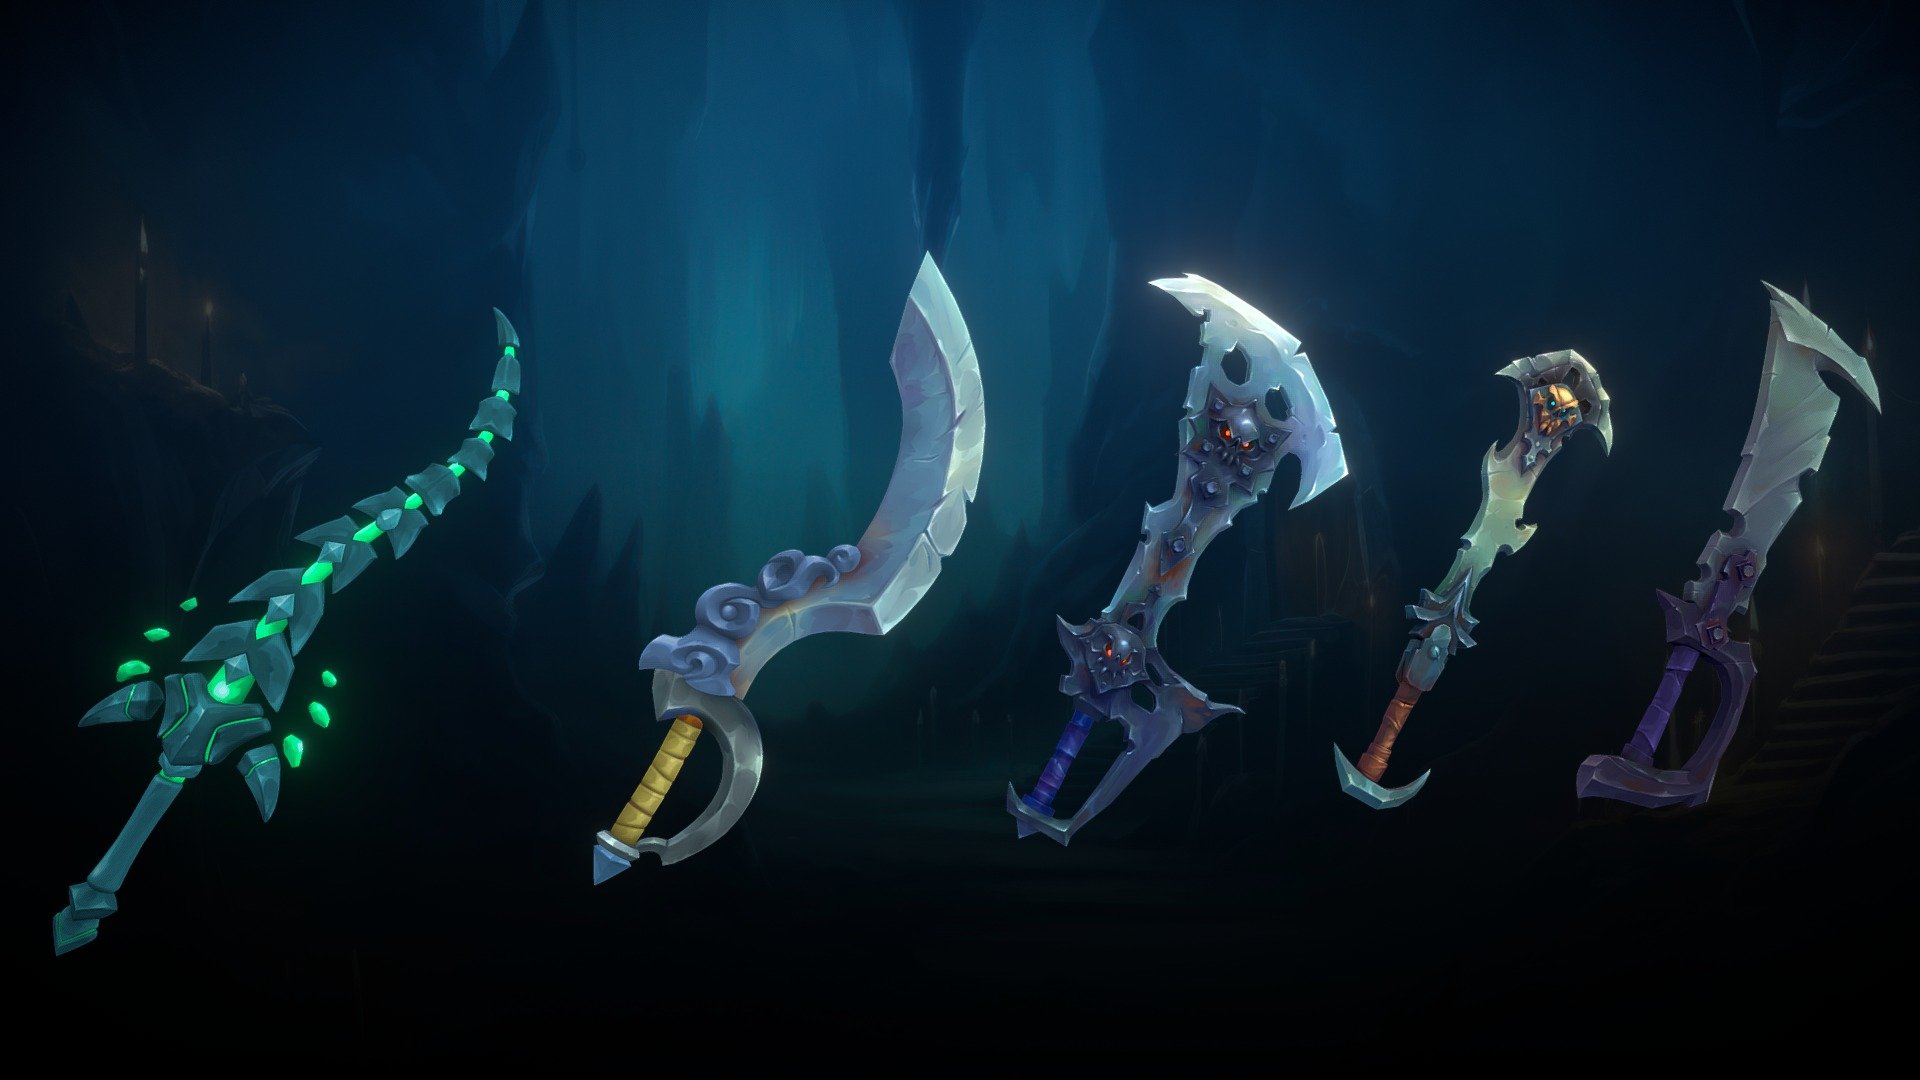 Stylized weapons for a project.

Software used: Zbrush, Autodesk Maya, Autodesk 3ds Max, Substance Painter - Stylized Fantasy Swords - 3D model by N-hance Studio (@Malice6731) 3d model